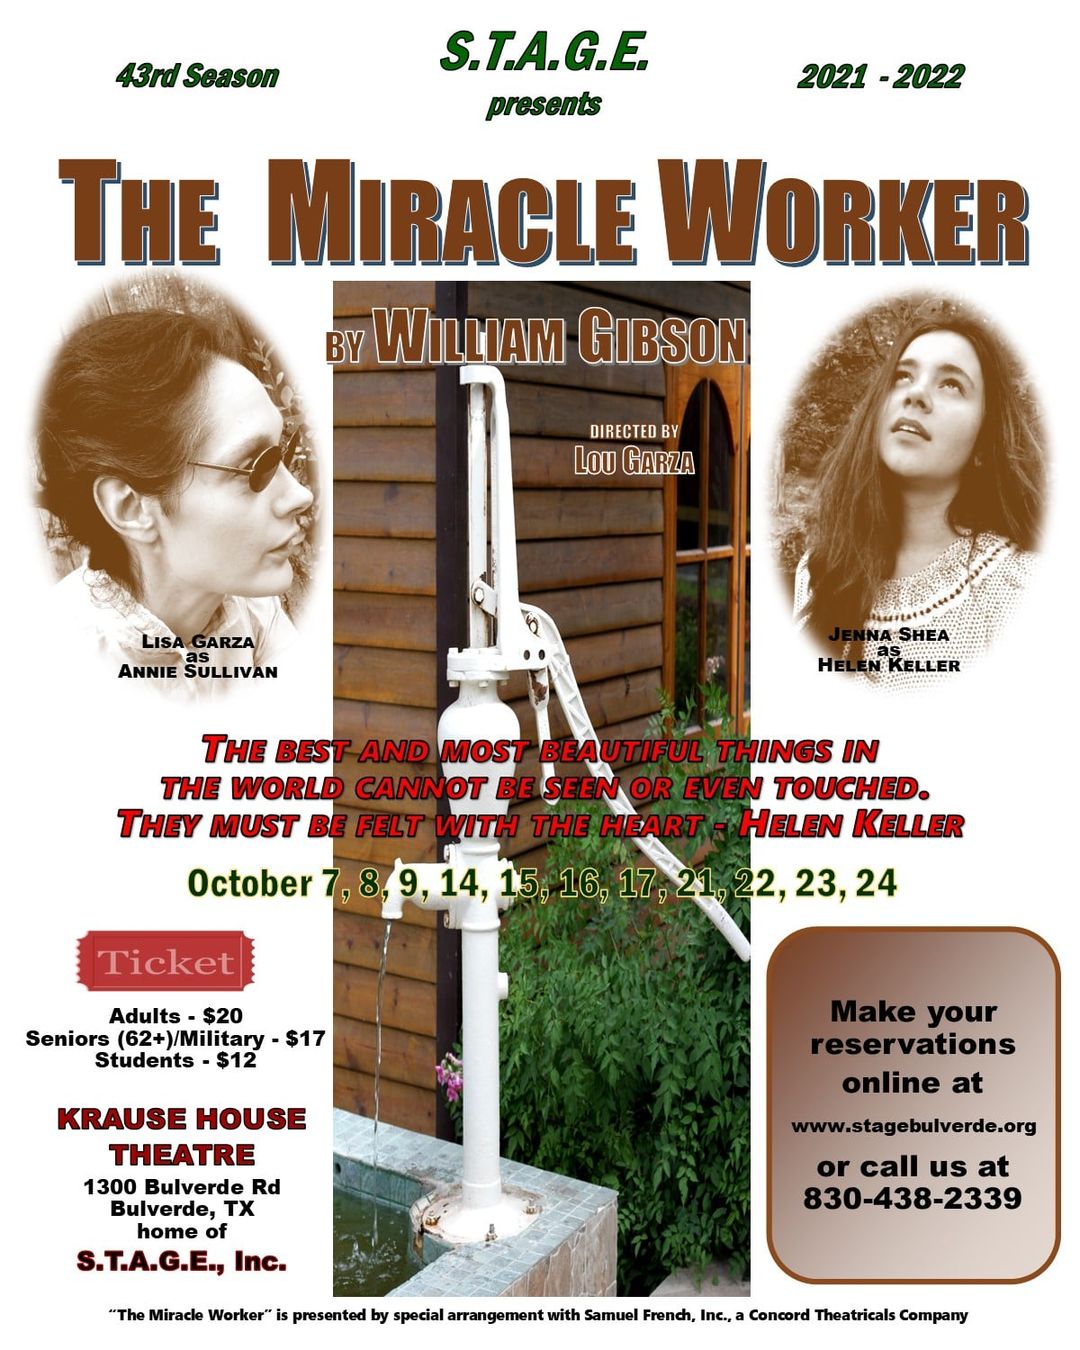 The Miracle Worker by S.T.A.G.E. Bulverde